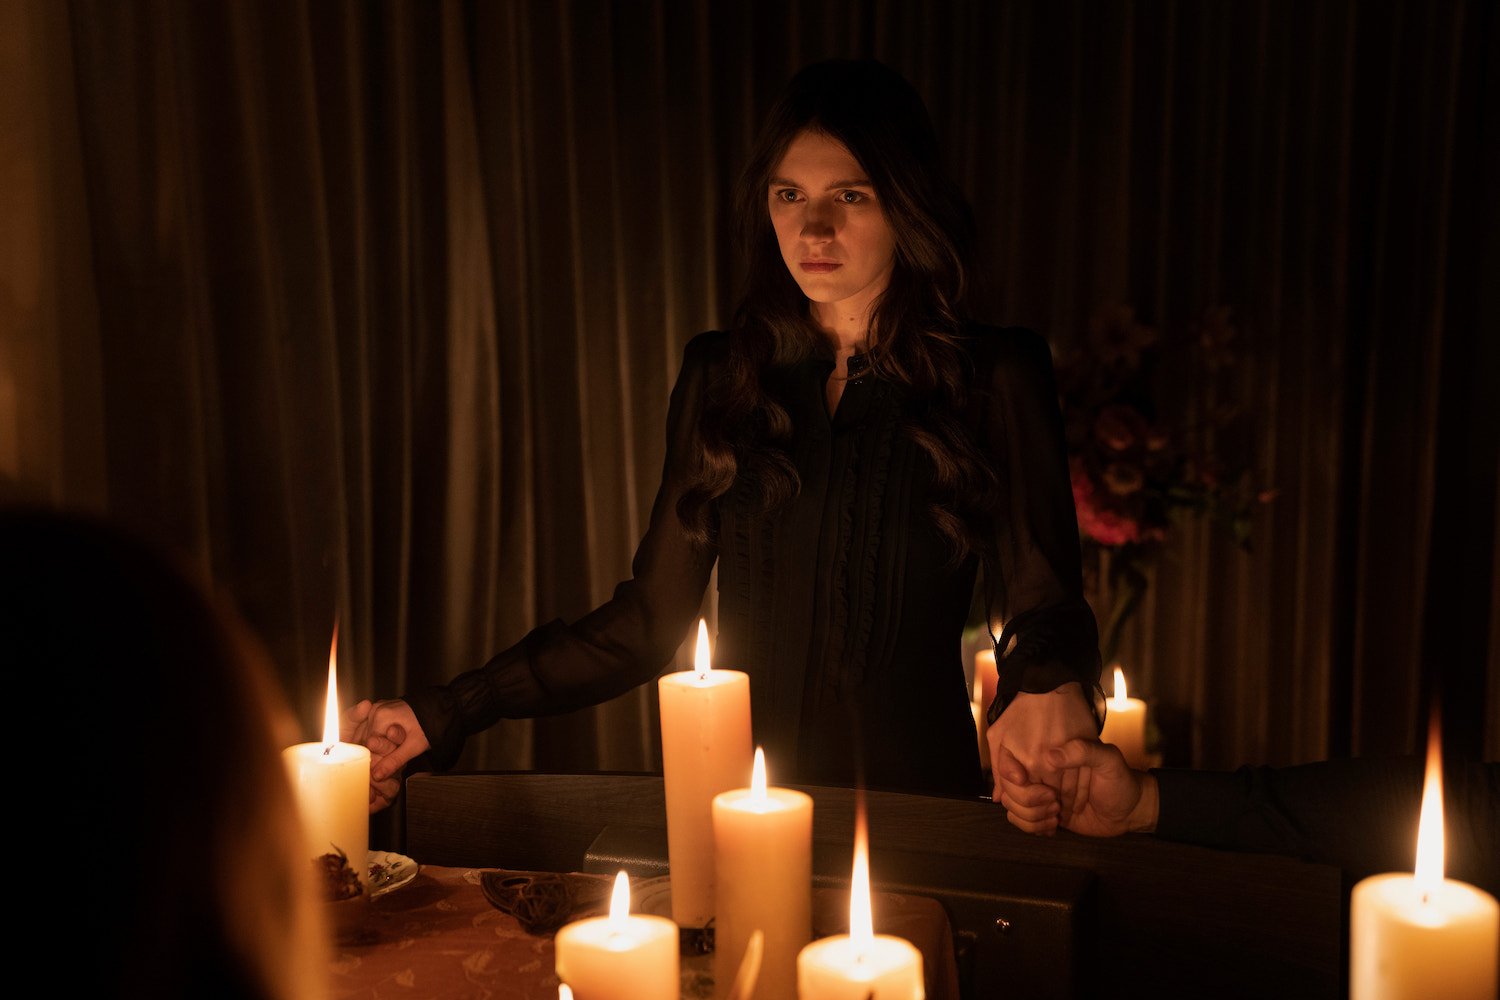 'Servant' Season 4 character Leanne, played by Nell Tiger Free, standing in front of several lit candles while wearing all black.